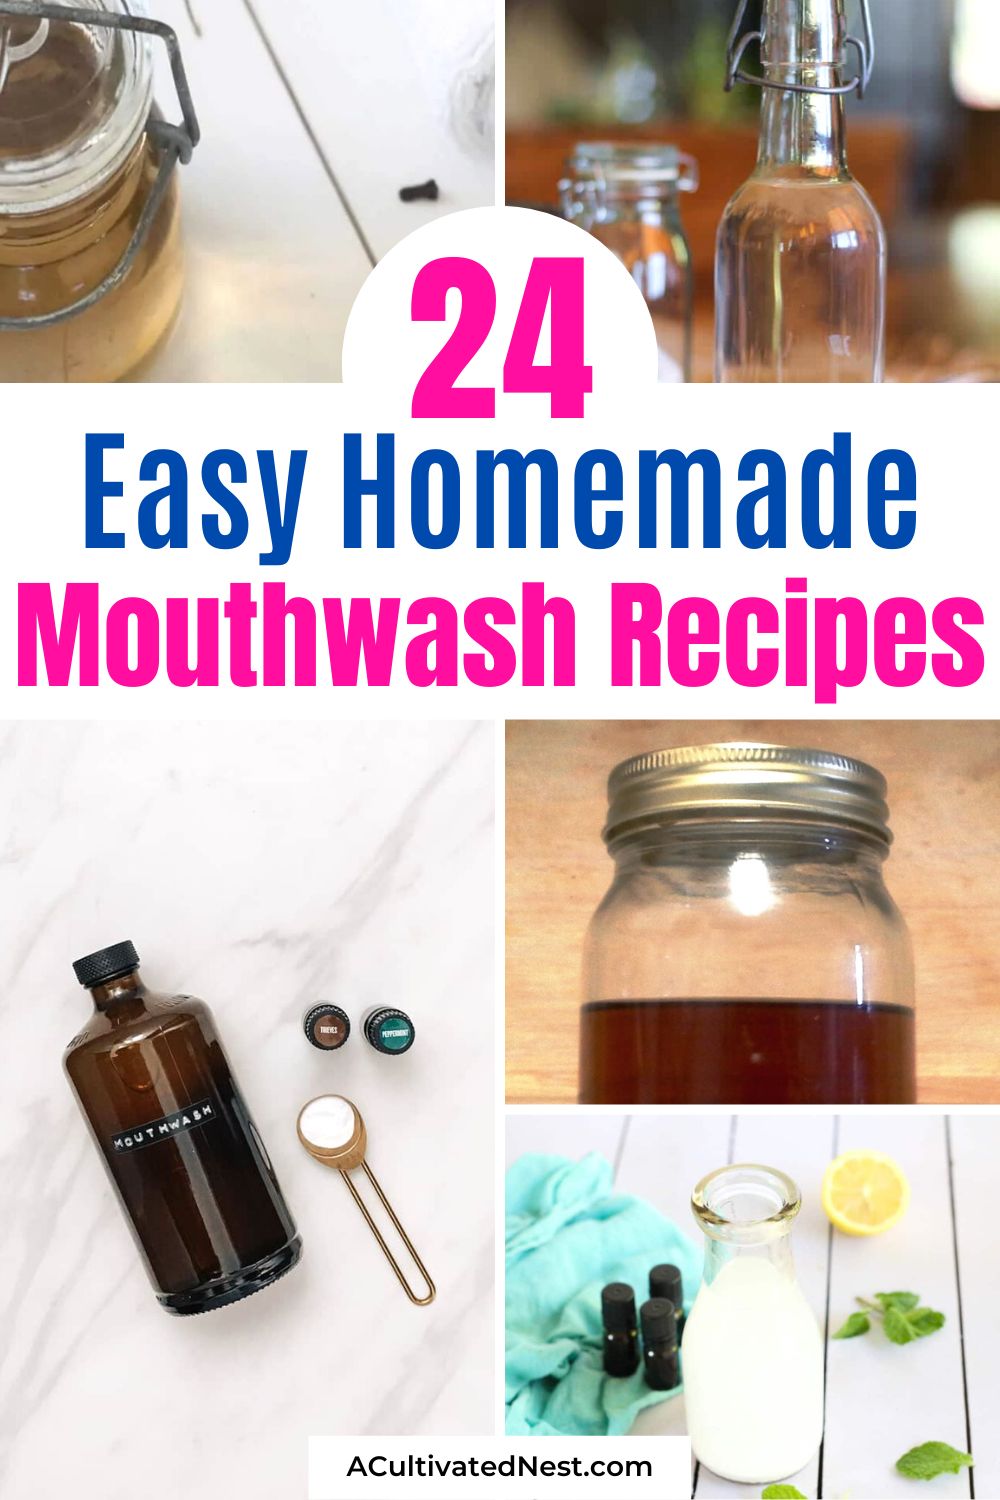 24 Easy DIY Mouthwash Recipes- Want to maintain good dental hygiene on a budget? Then you'll love these easy and effective DIY mouthwash recipes! You can easily make your own inexpensive all-natural mouthwash! | #homemadeSolutions #mouthwash #DIY #homemadeMouthwash #ACultivatedNest